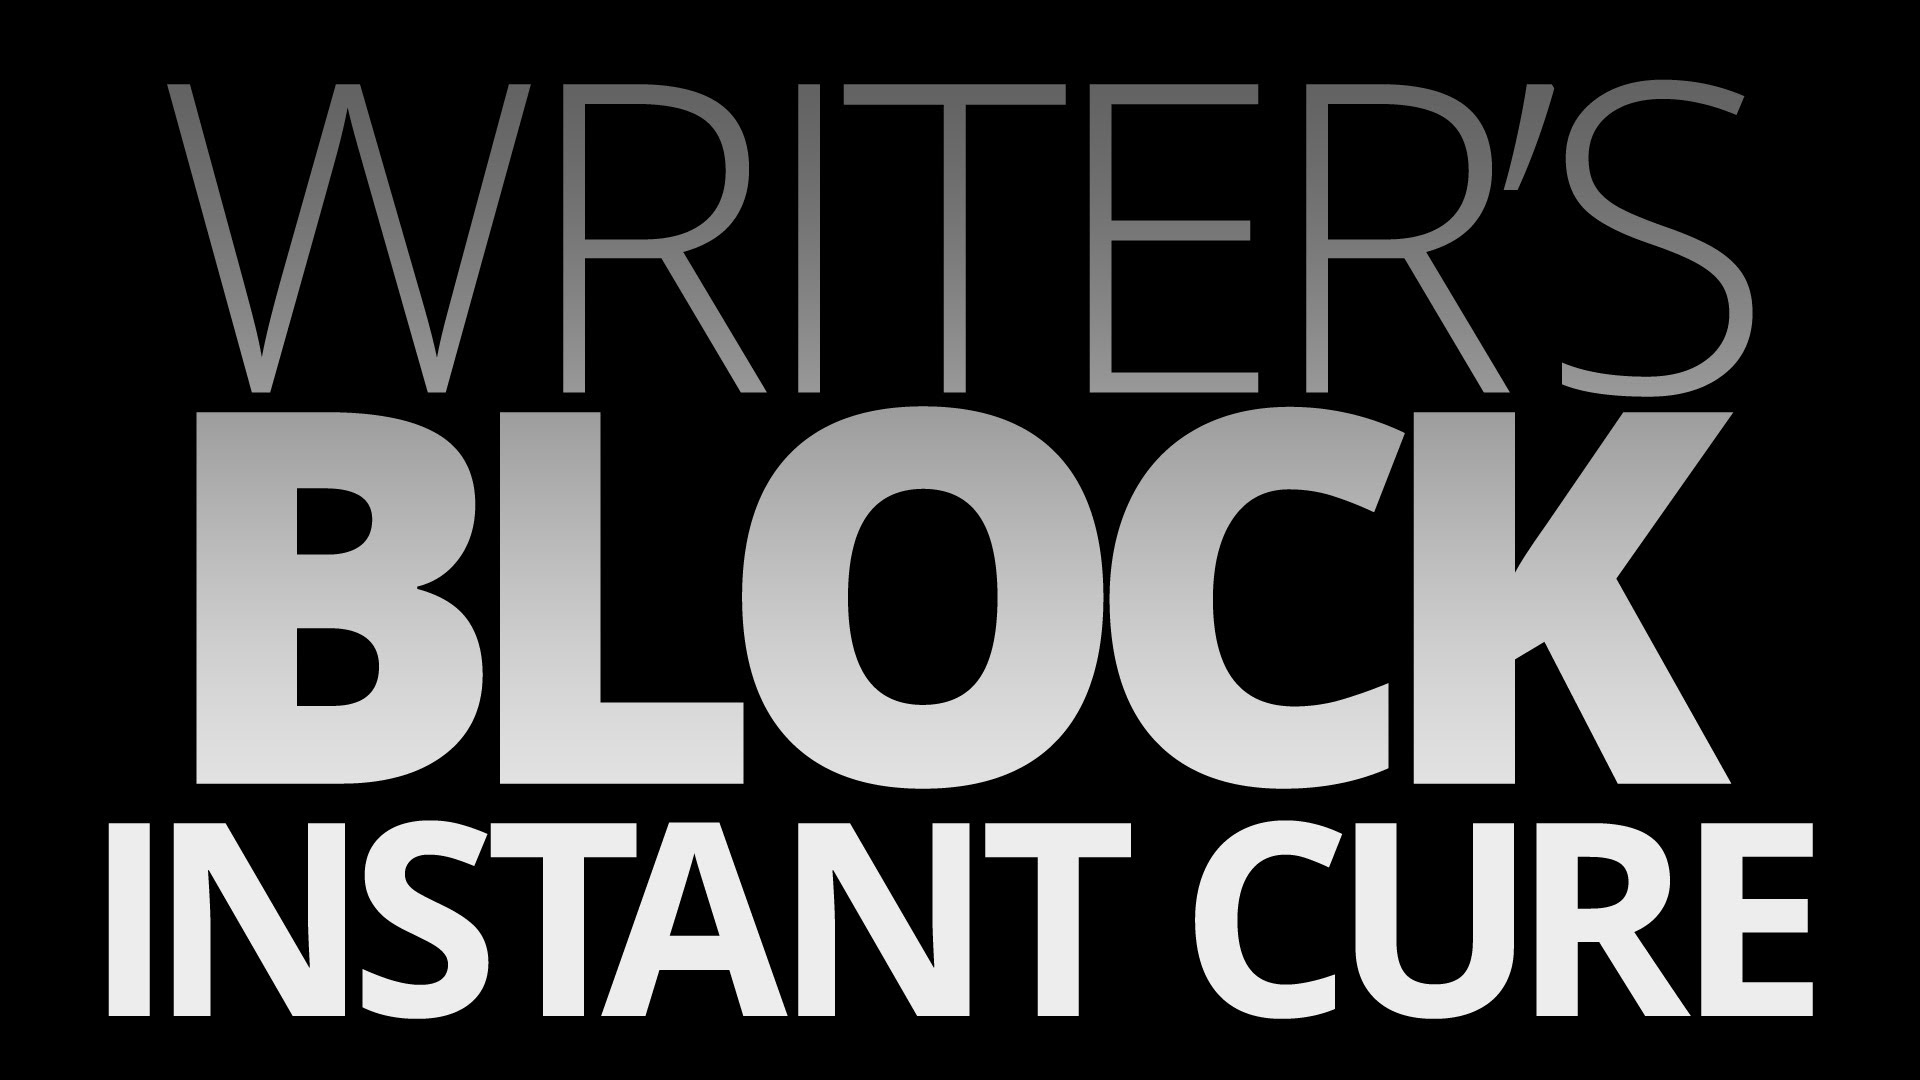 How to Get rid of writers block, The easy way.